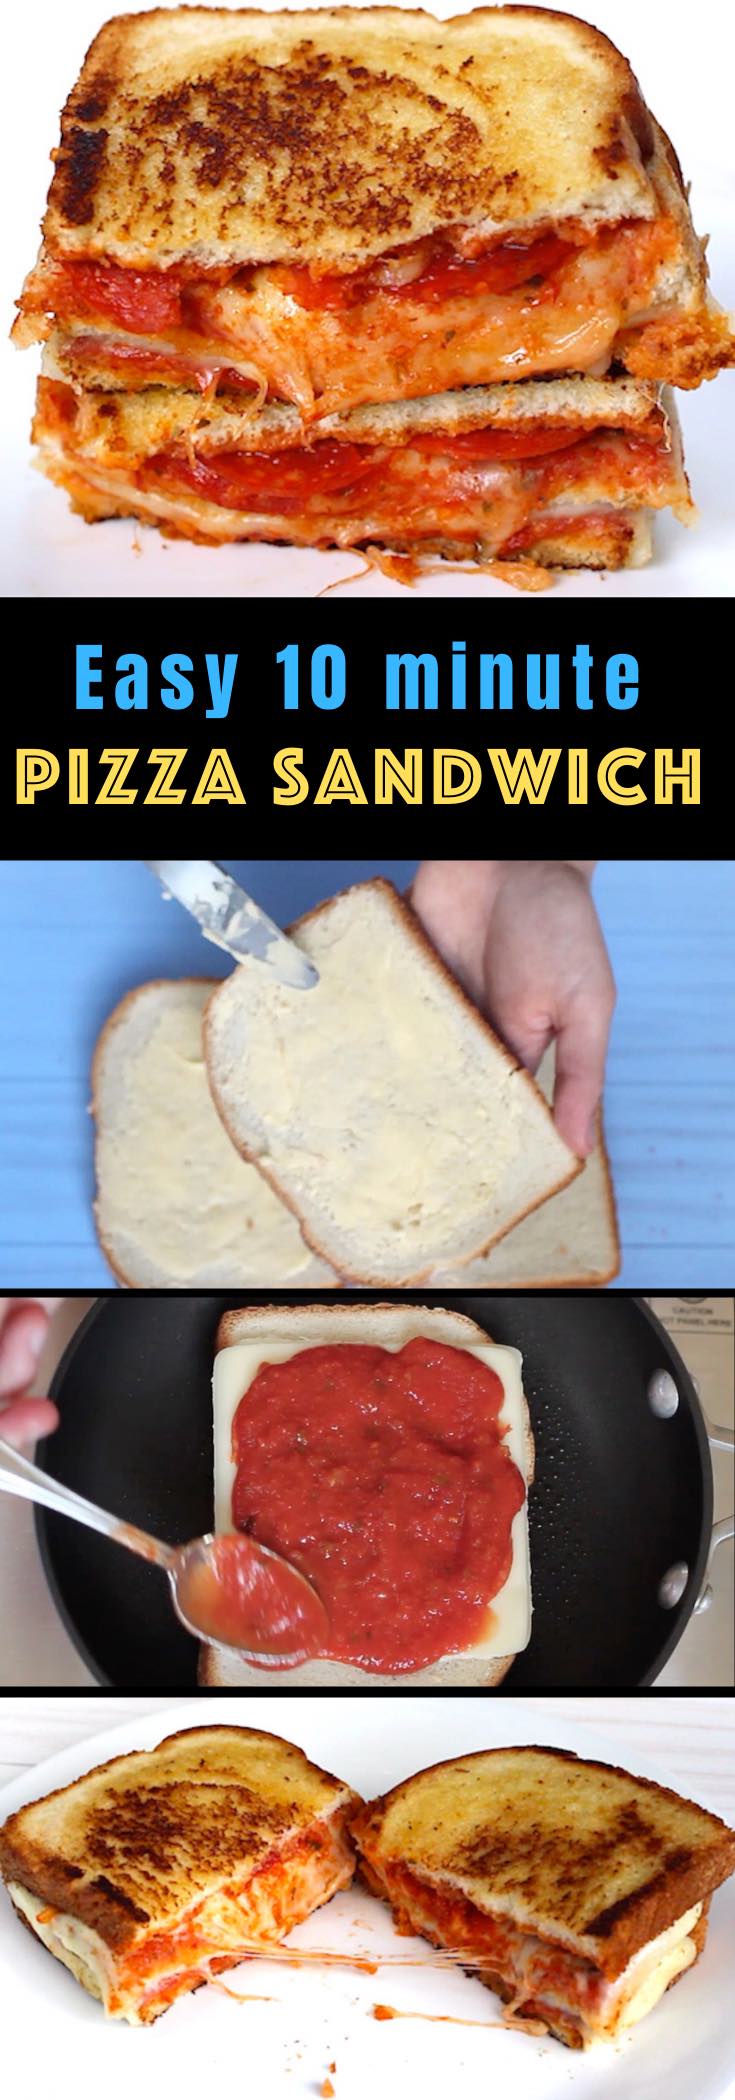 These easy Pizza Sandwiches combine your favorite bread with delicious pizza toppings such as pepperoni and mozzarella cheese, all cooked to golden cheesy perfection. They'll take your love for grilled cheese to a new level!